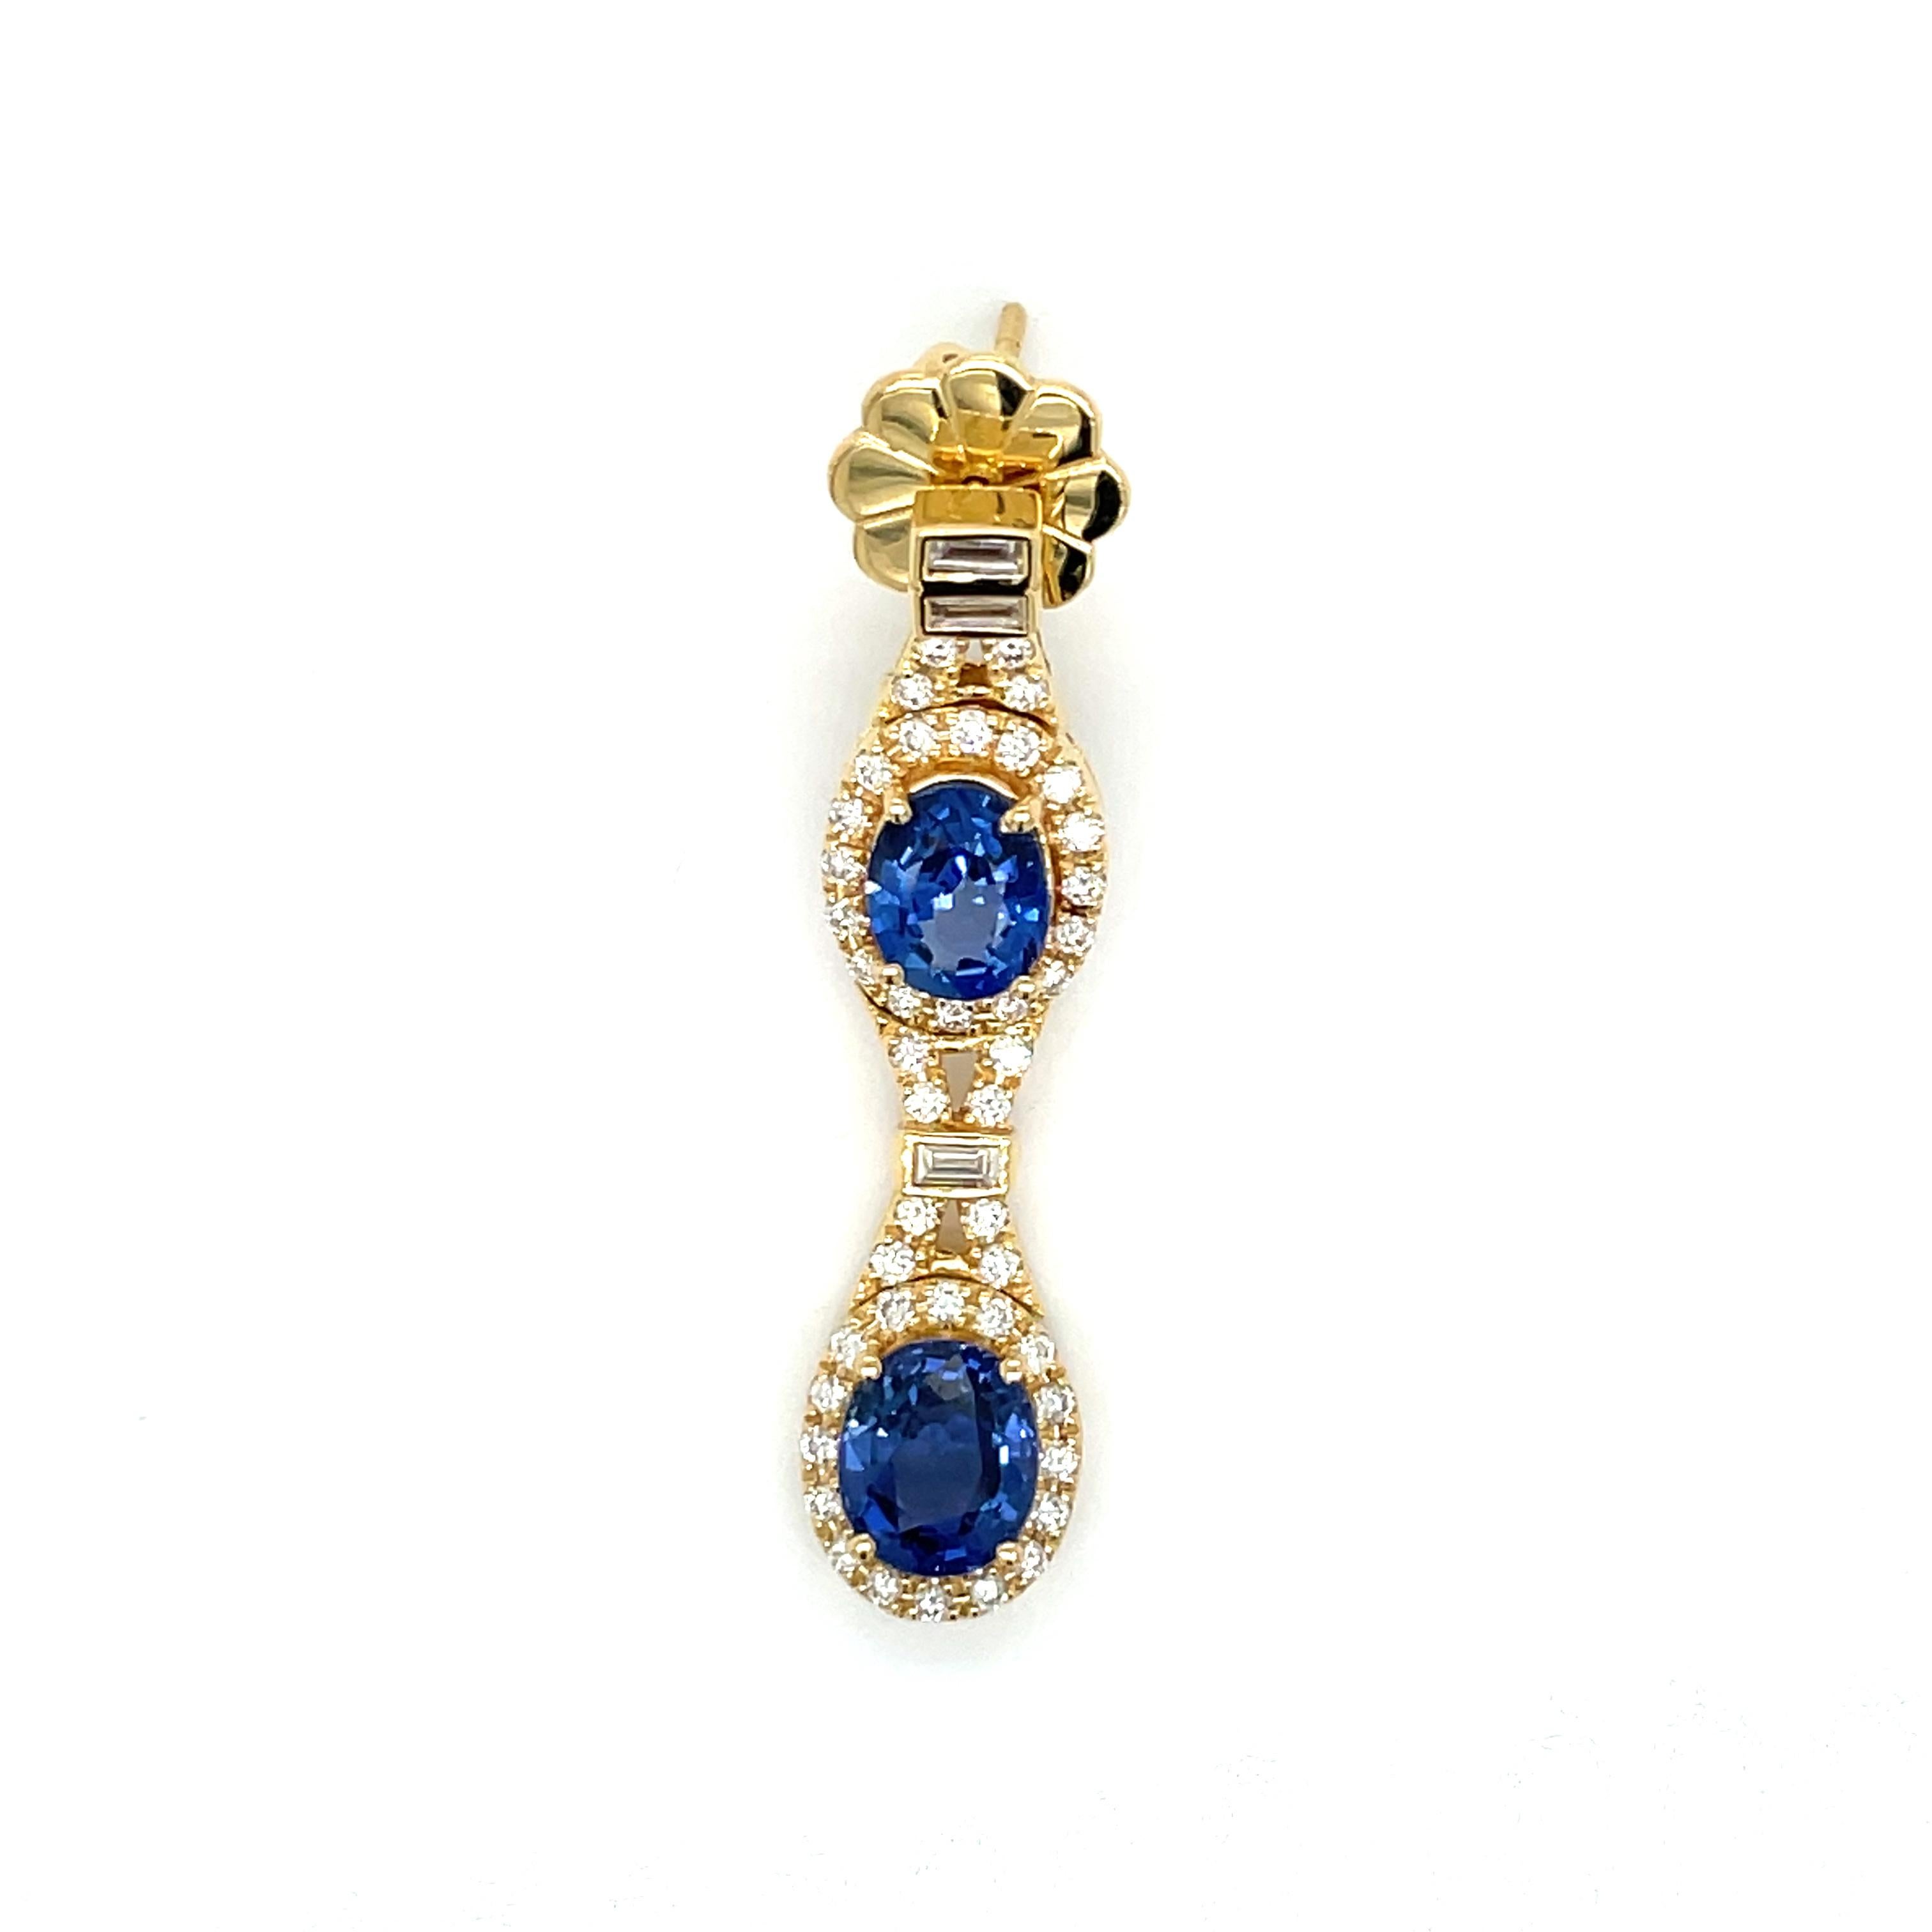 You'll be the center of attention with these vibrant sapphire and diamond Beverley K dangle earrings. Featuring four oval shaped sapphires weighing 5.60 carats, and 2.37 carats of round and baguette shaped diamonds, with SI1 clarity. The stones are